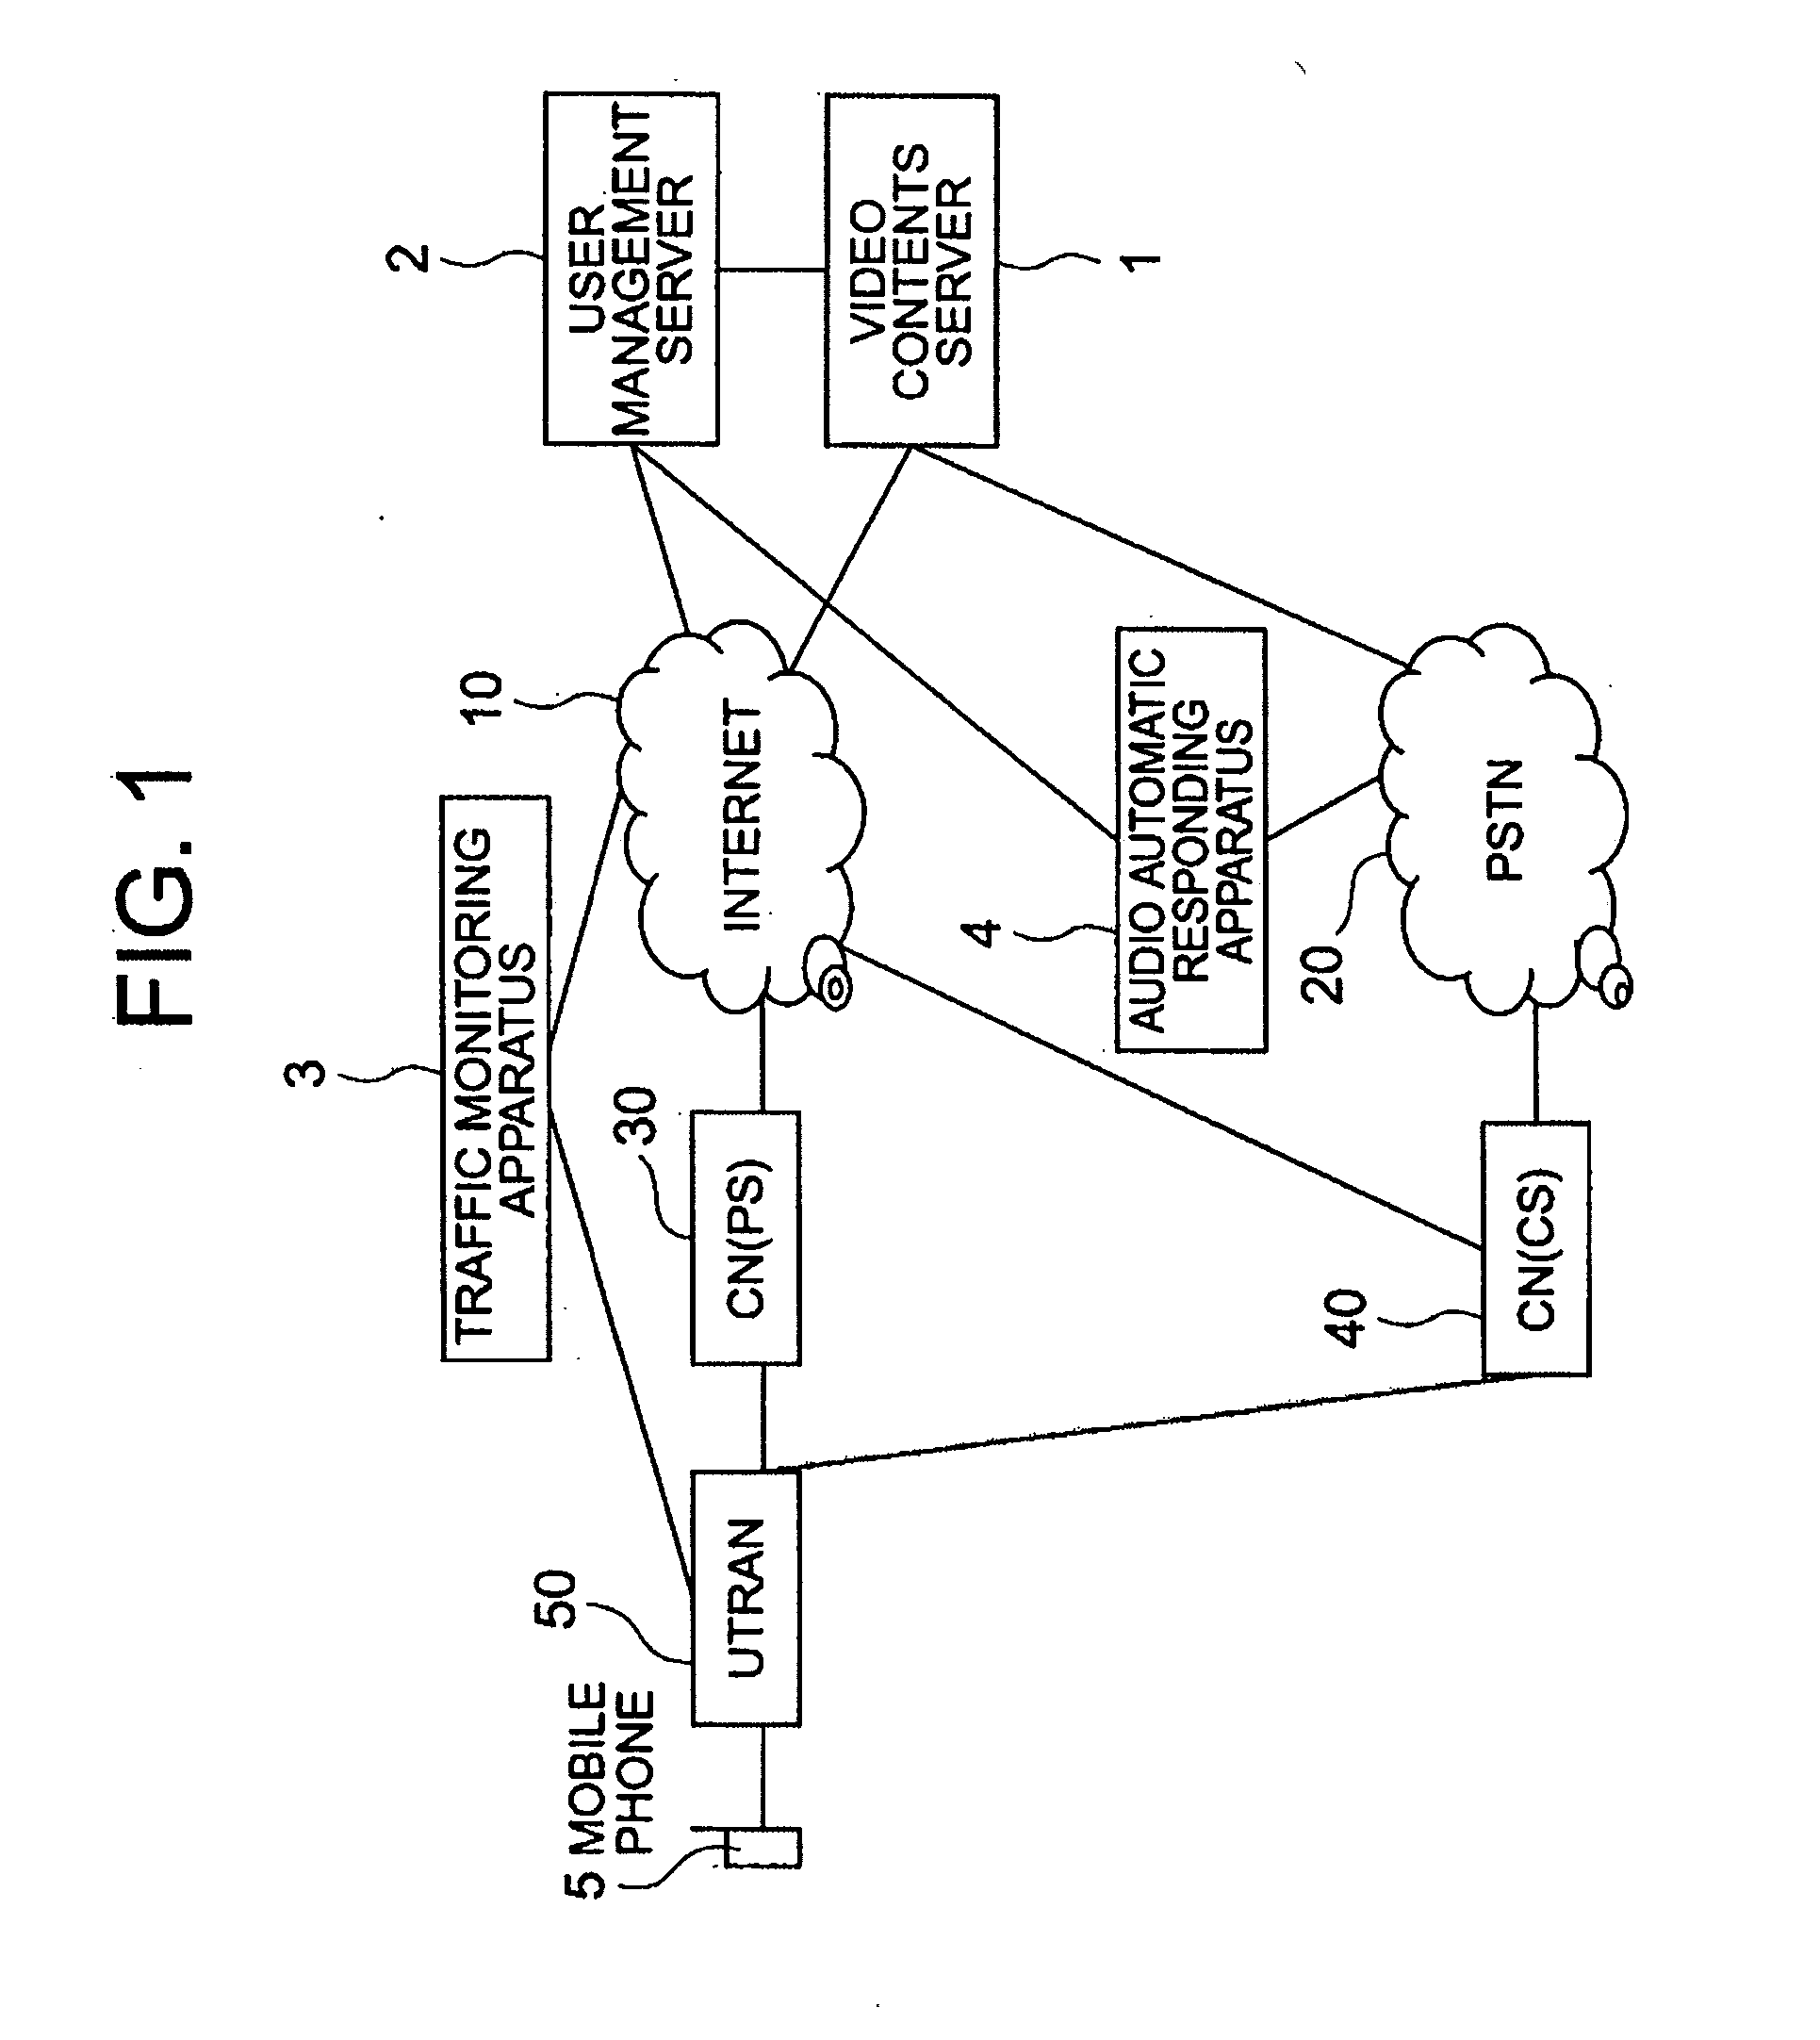 Method for distributing video information to mobile phone based on push technology